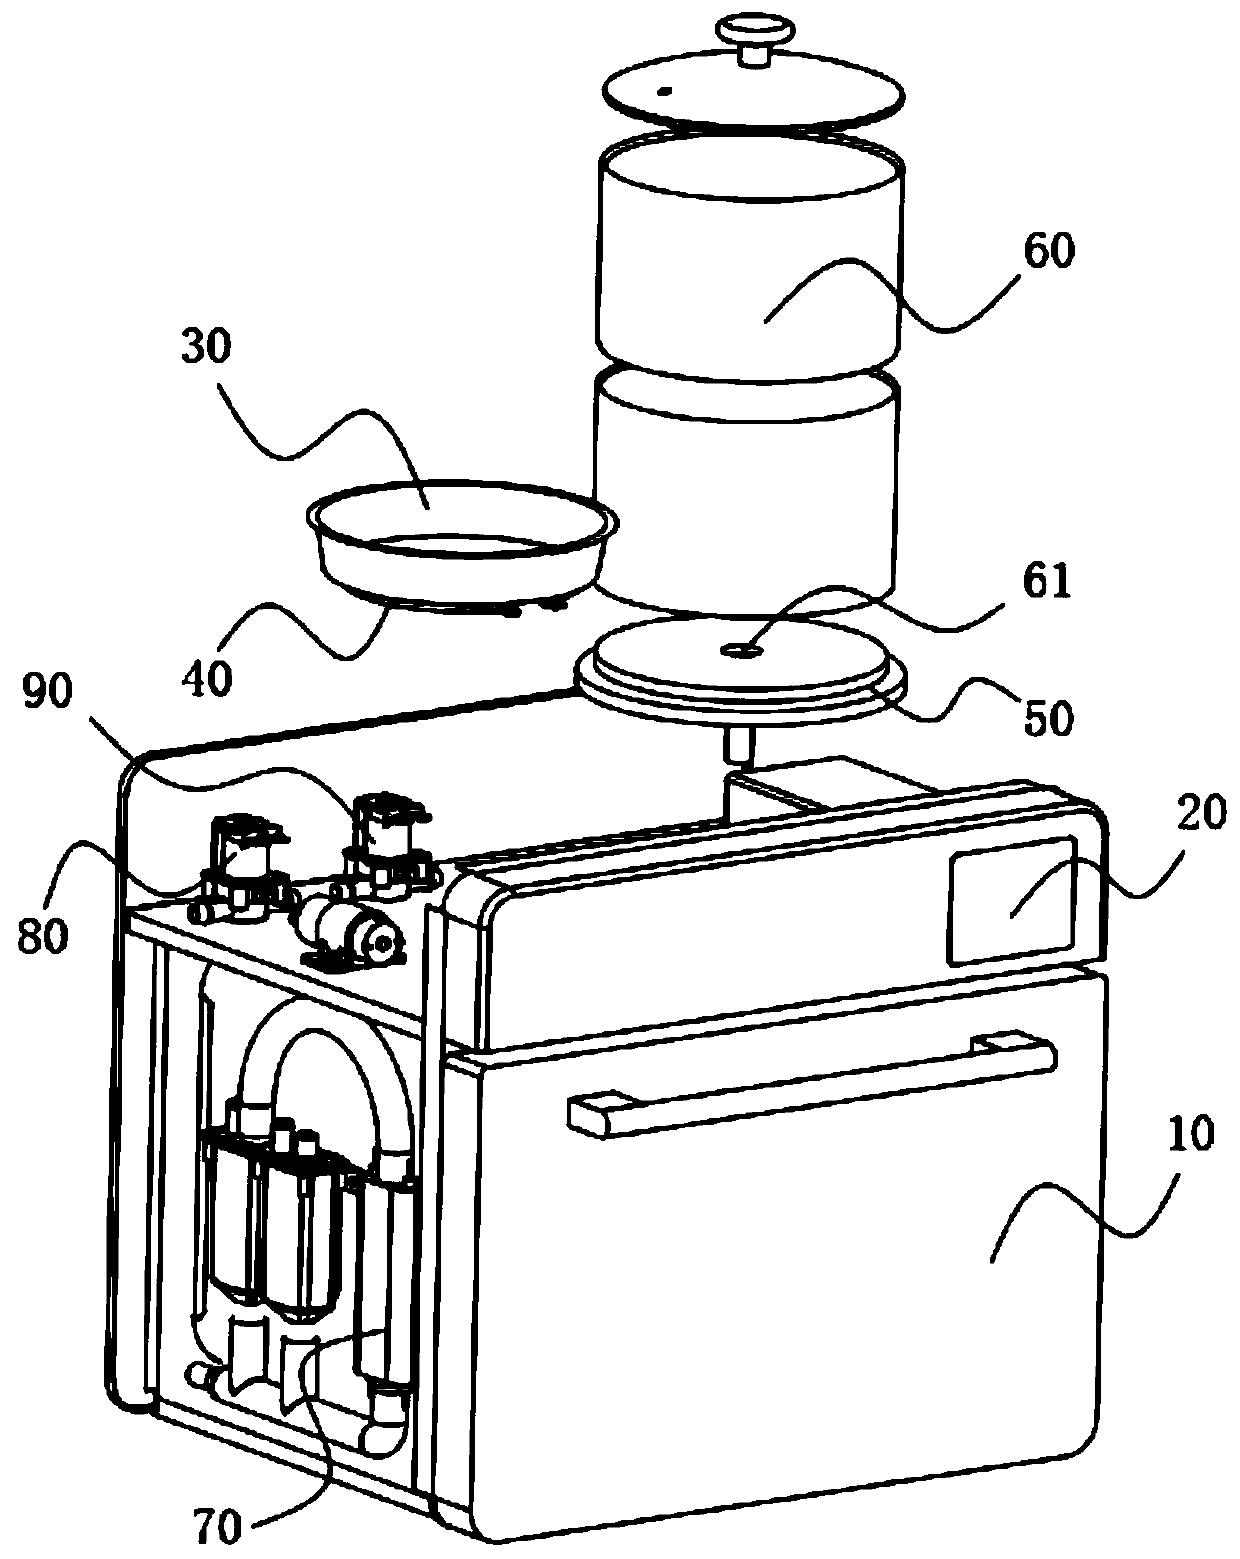 Cooking device with steaming function